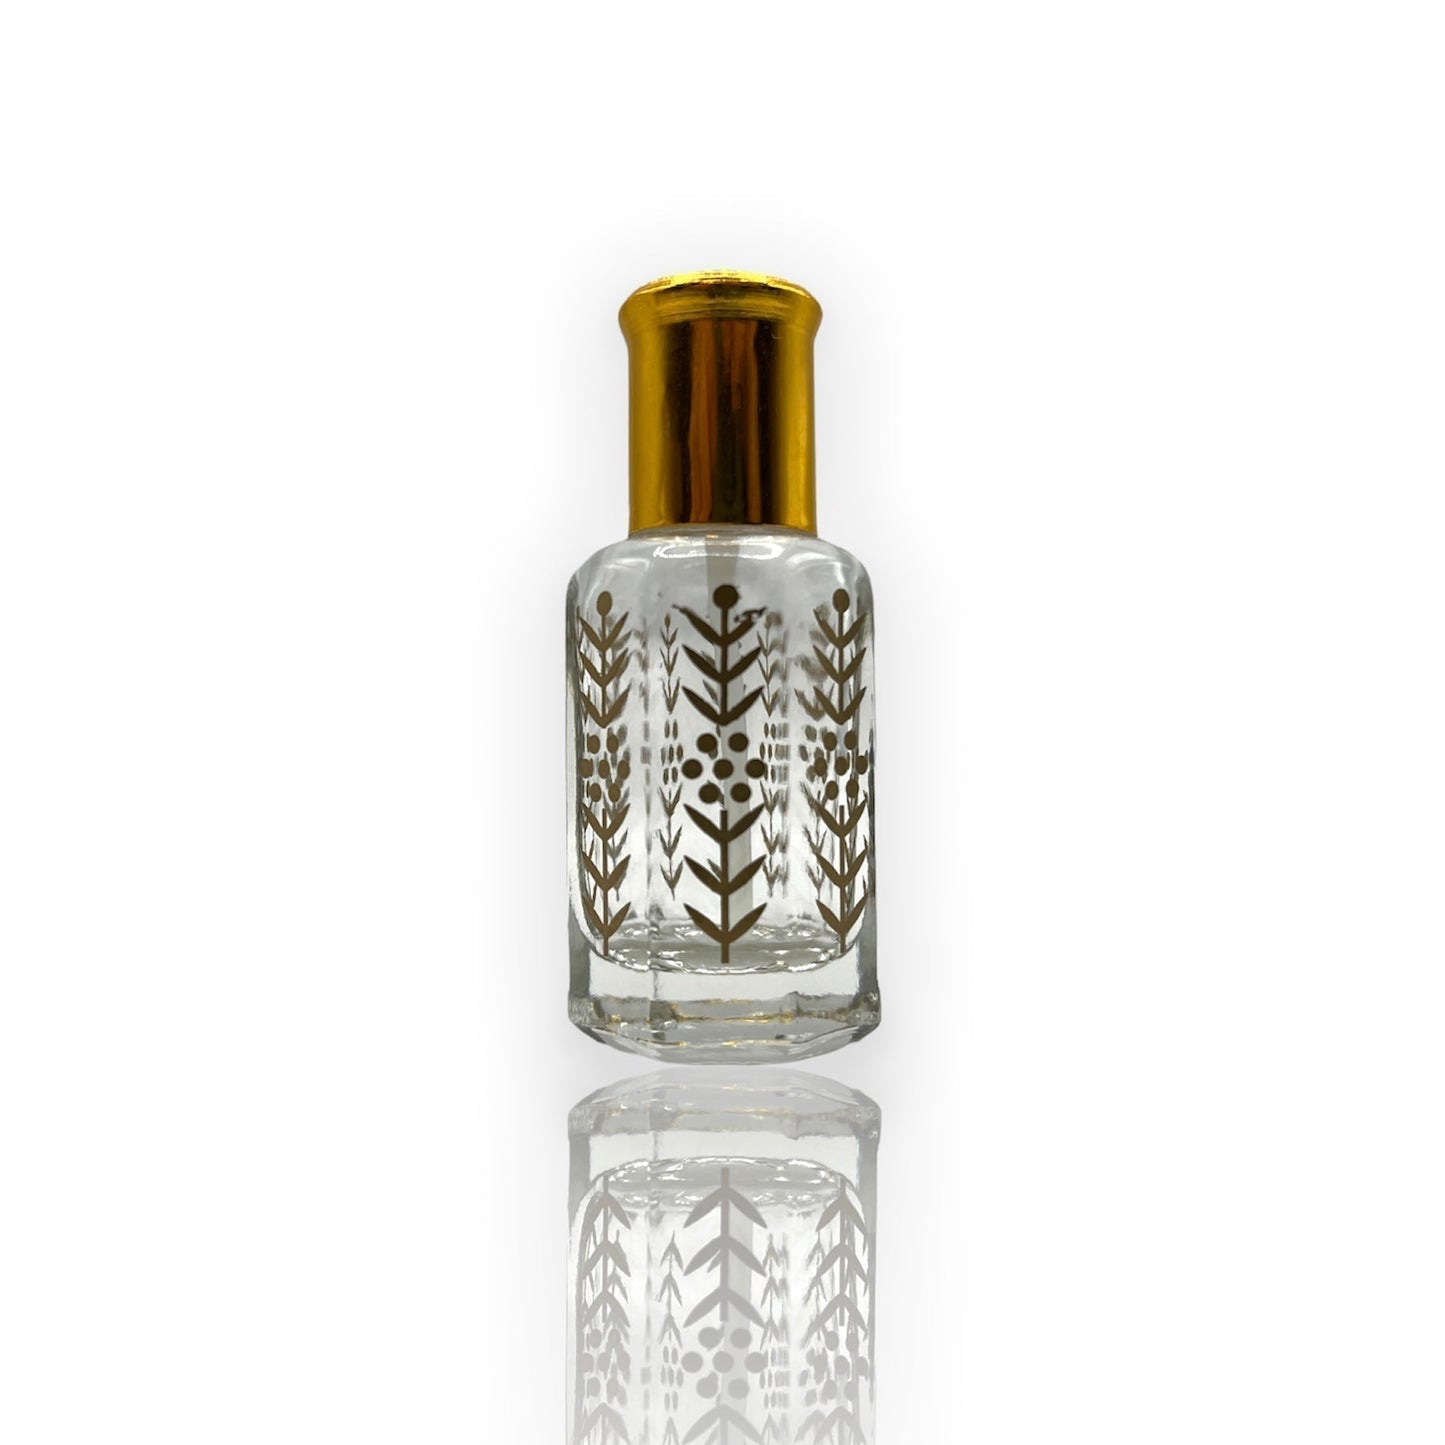 F-12 Oil Perfume *Inspired by Escape